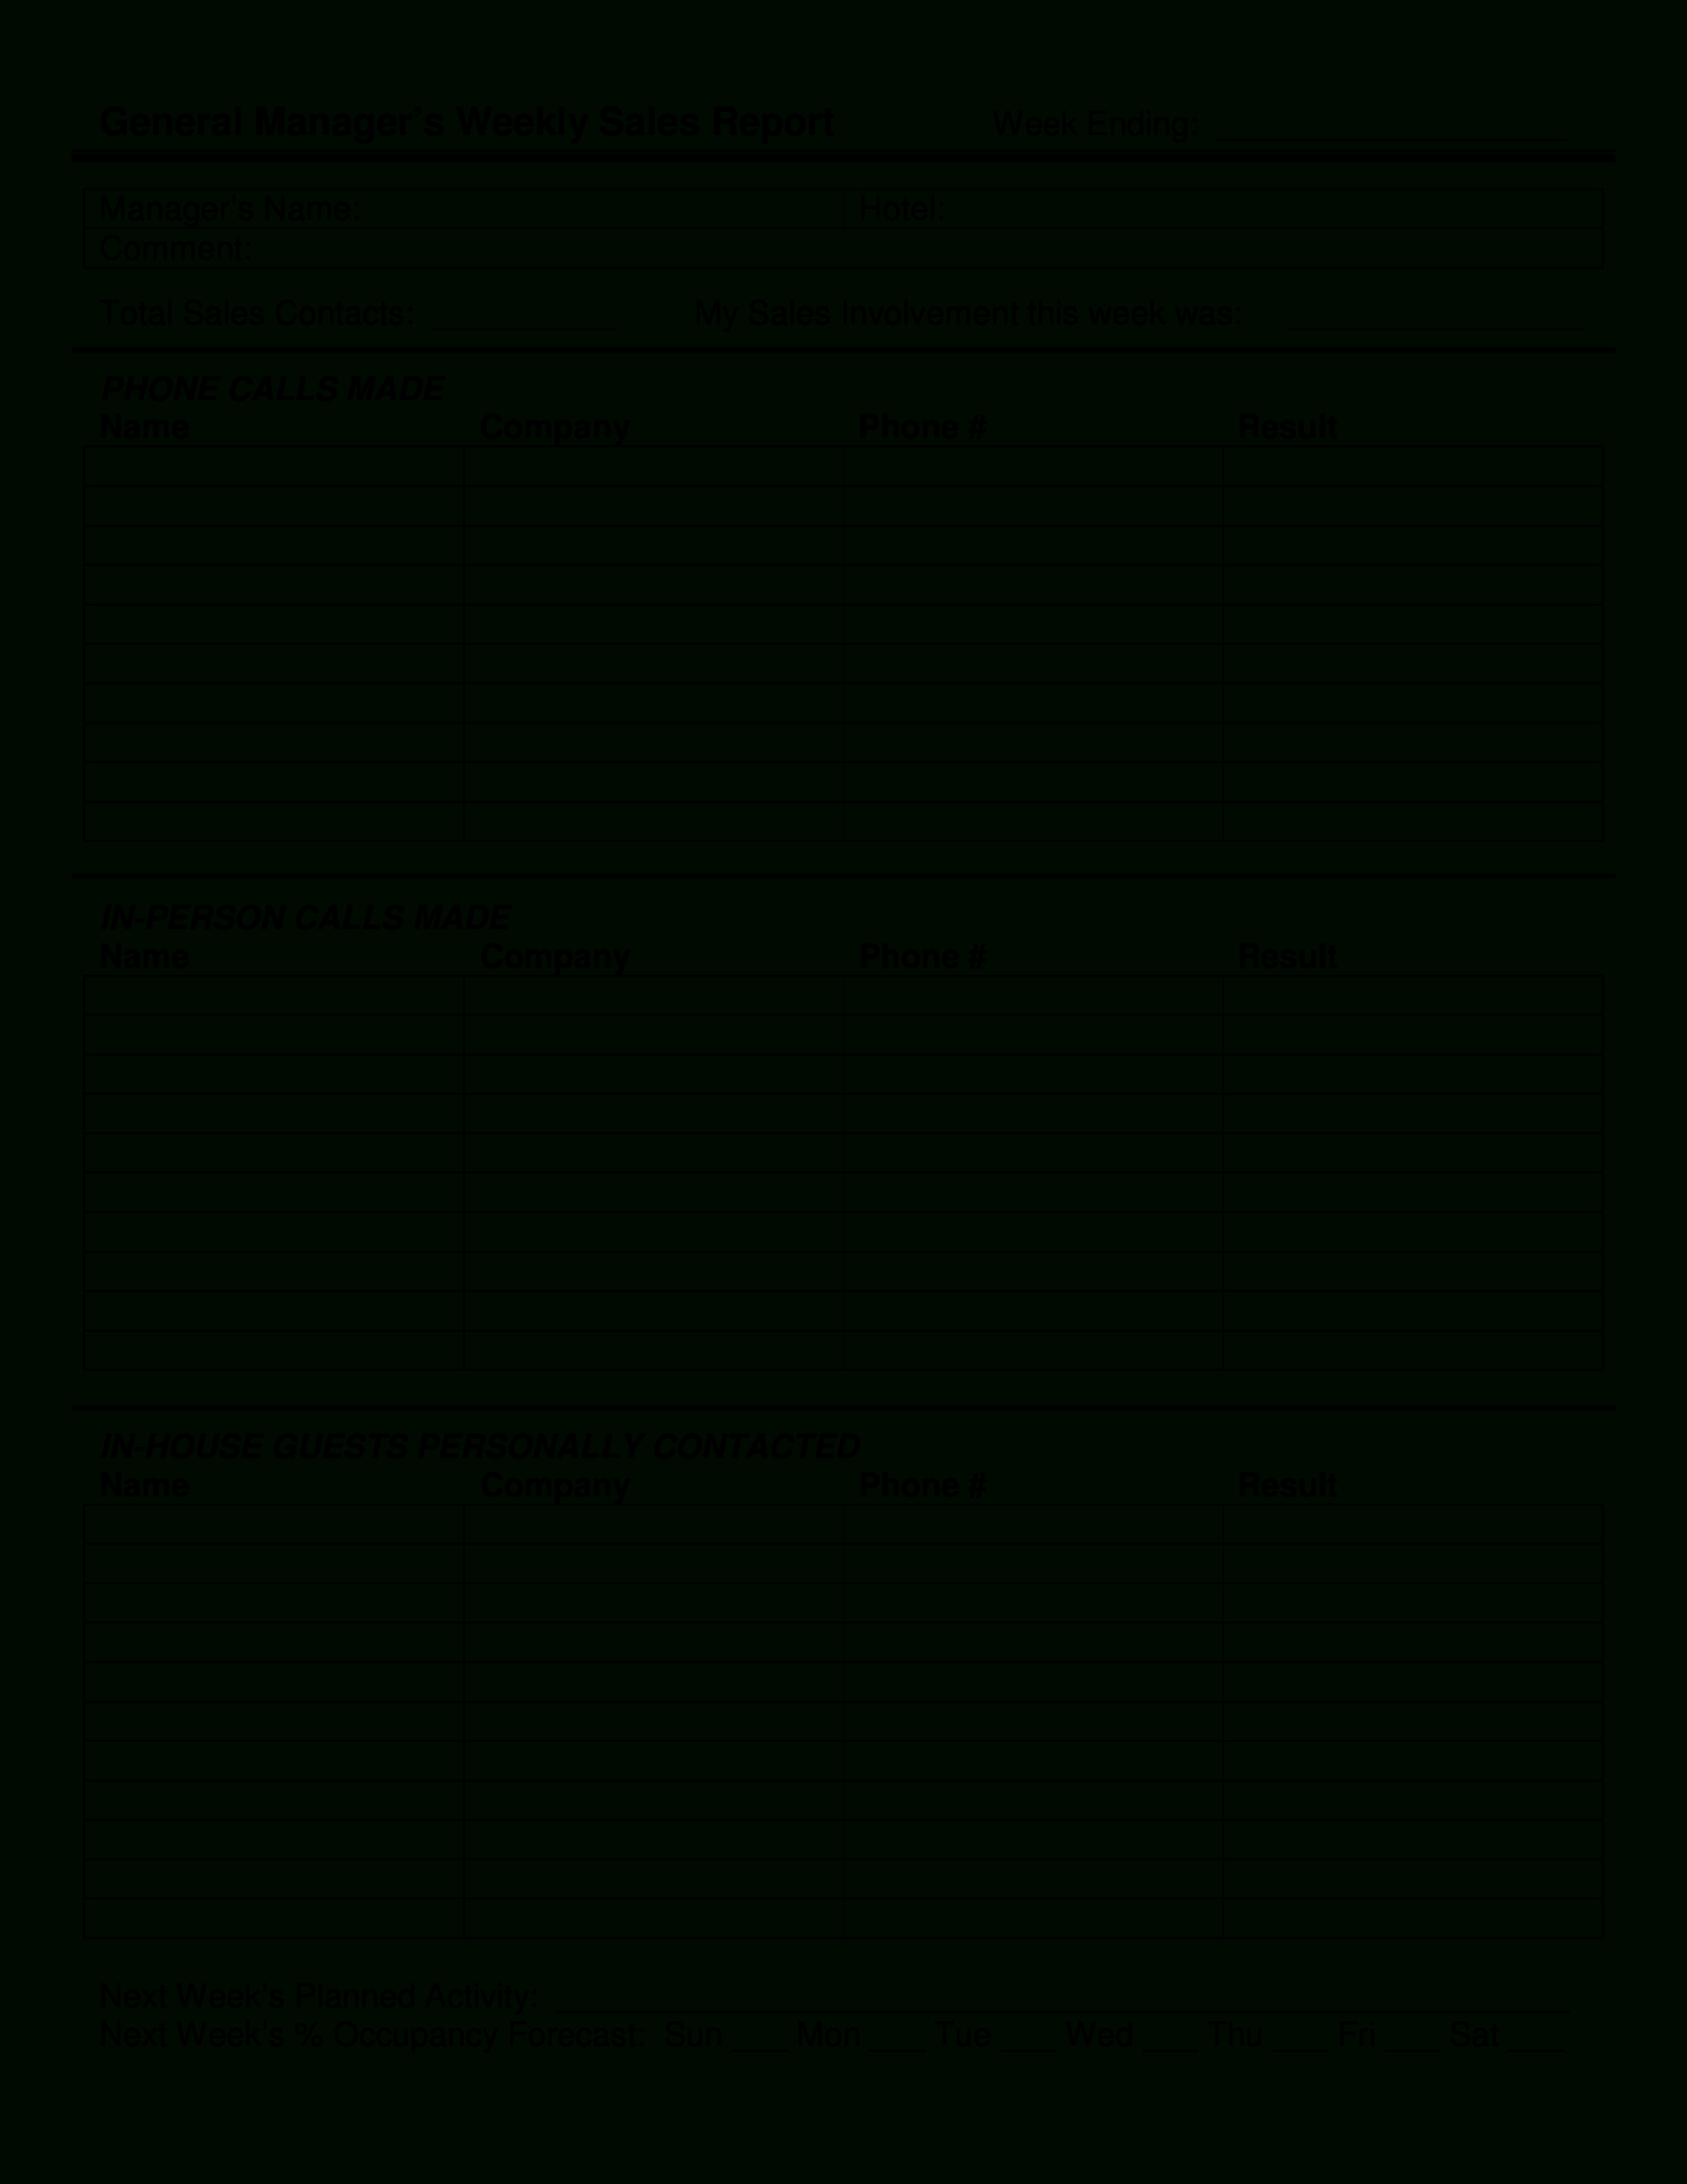 014 Weekly Activities Report Template Fantastic Ideas With Regard To Activity Report Template Word